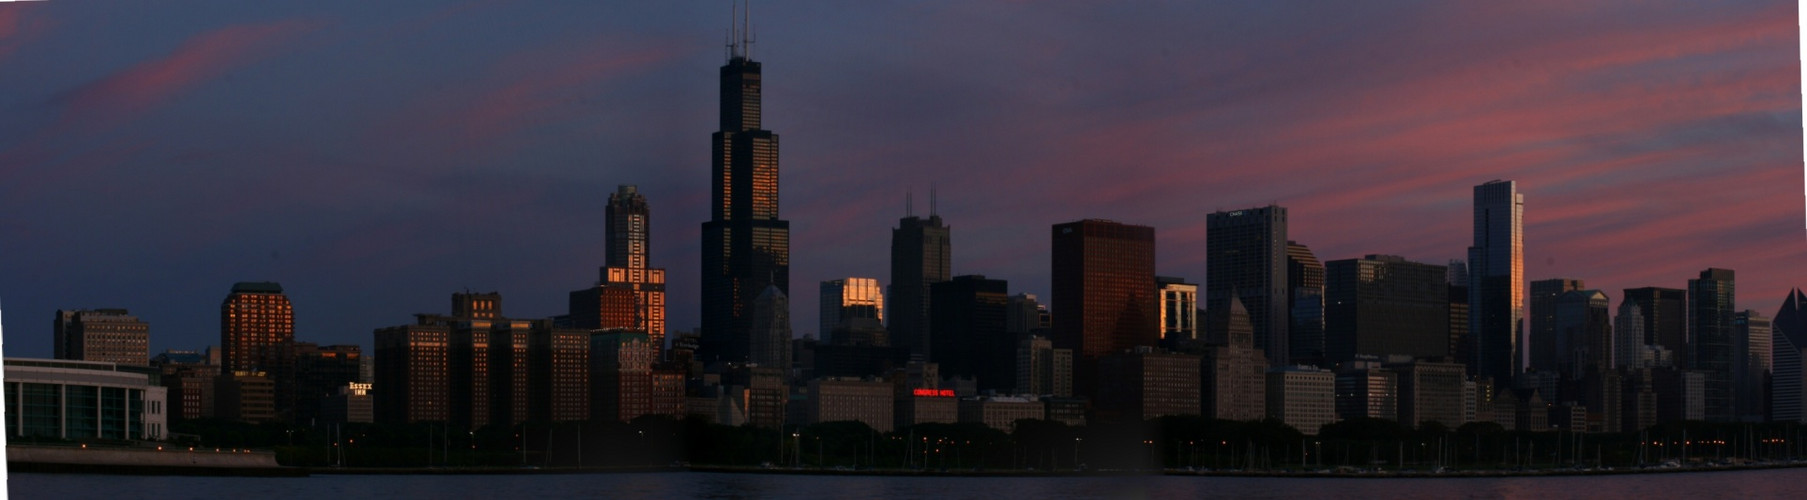 Chicago Panorama first light